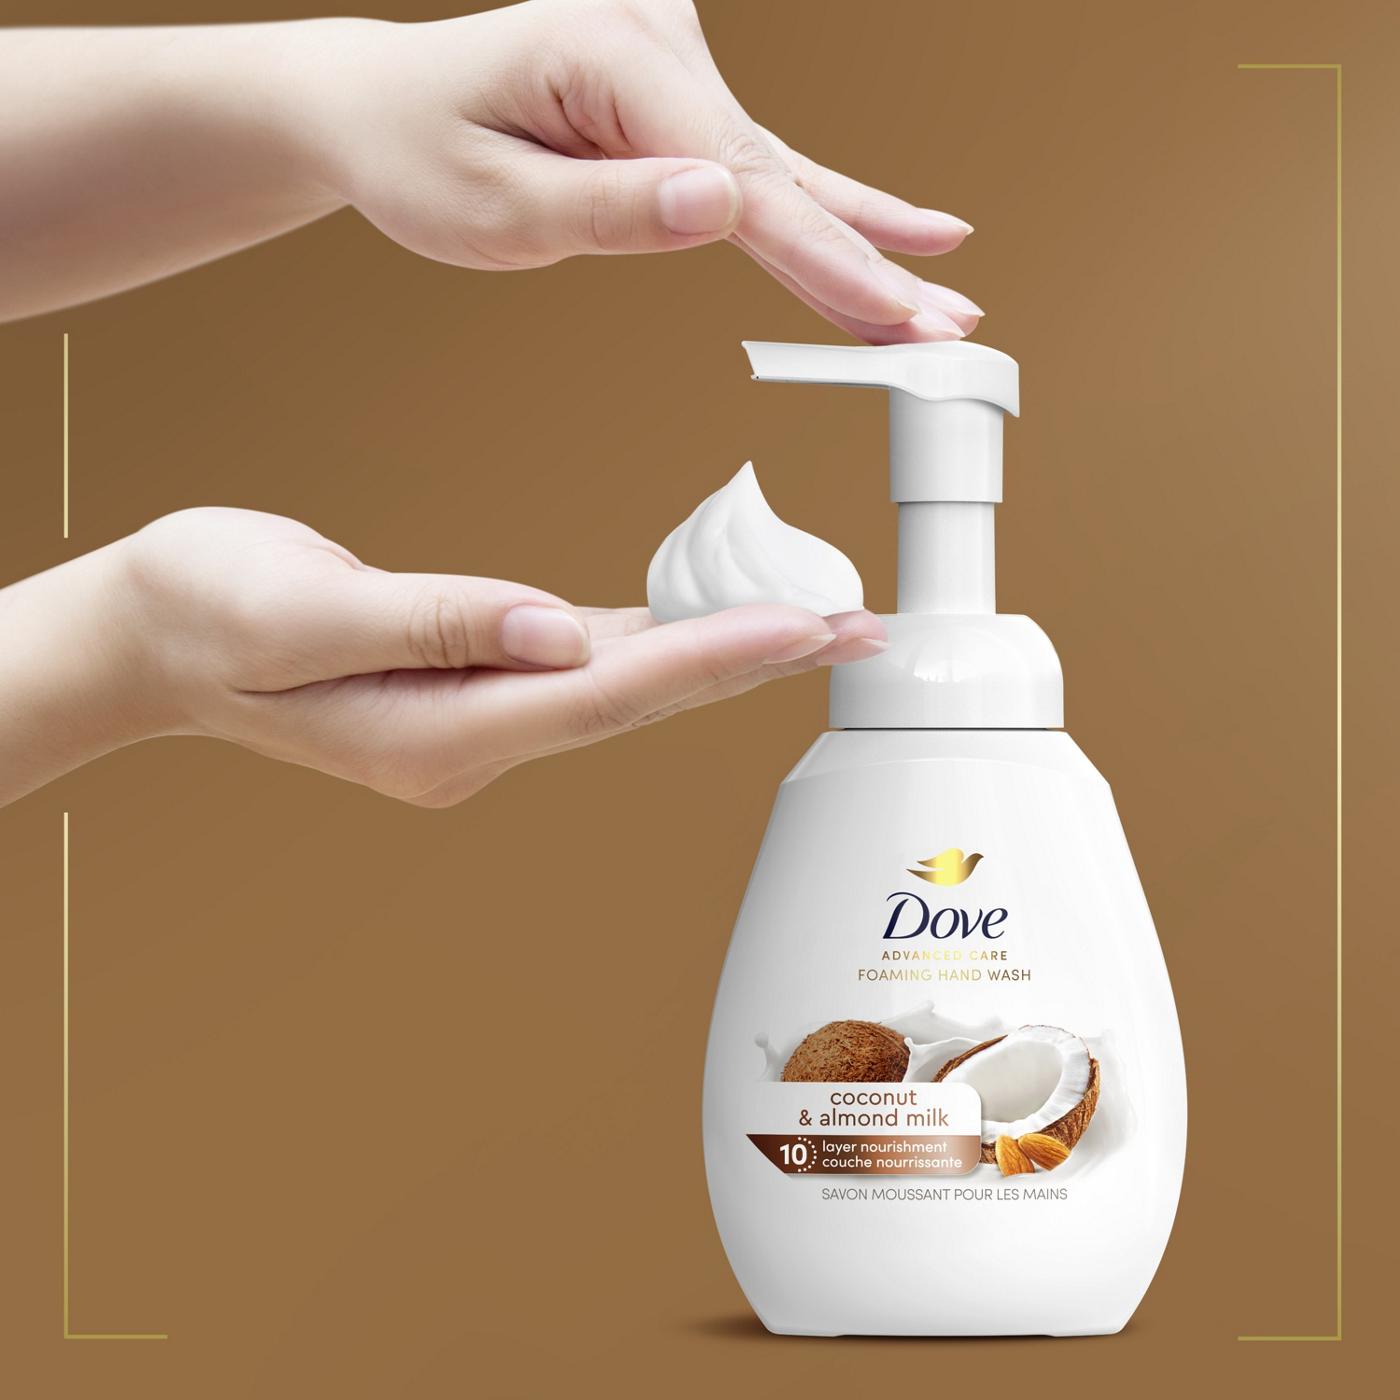 Dove Coconut & Almond Milk Protects Skin from Dryness; image 4 of 8